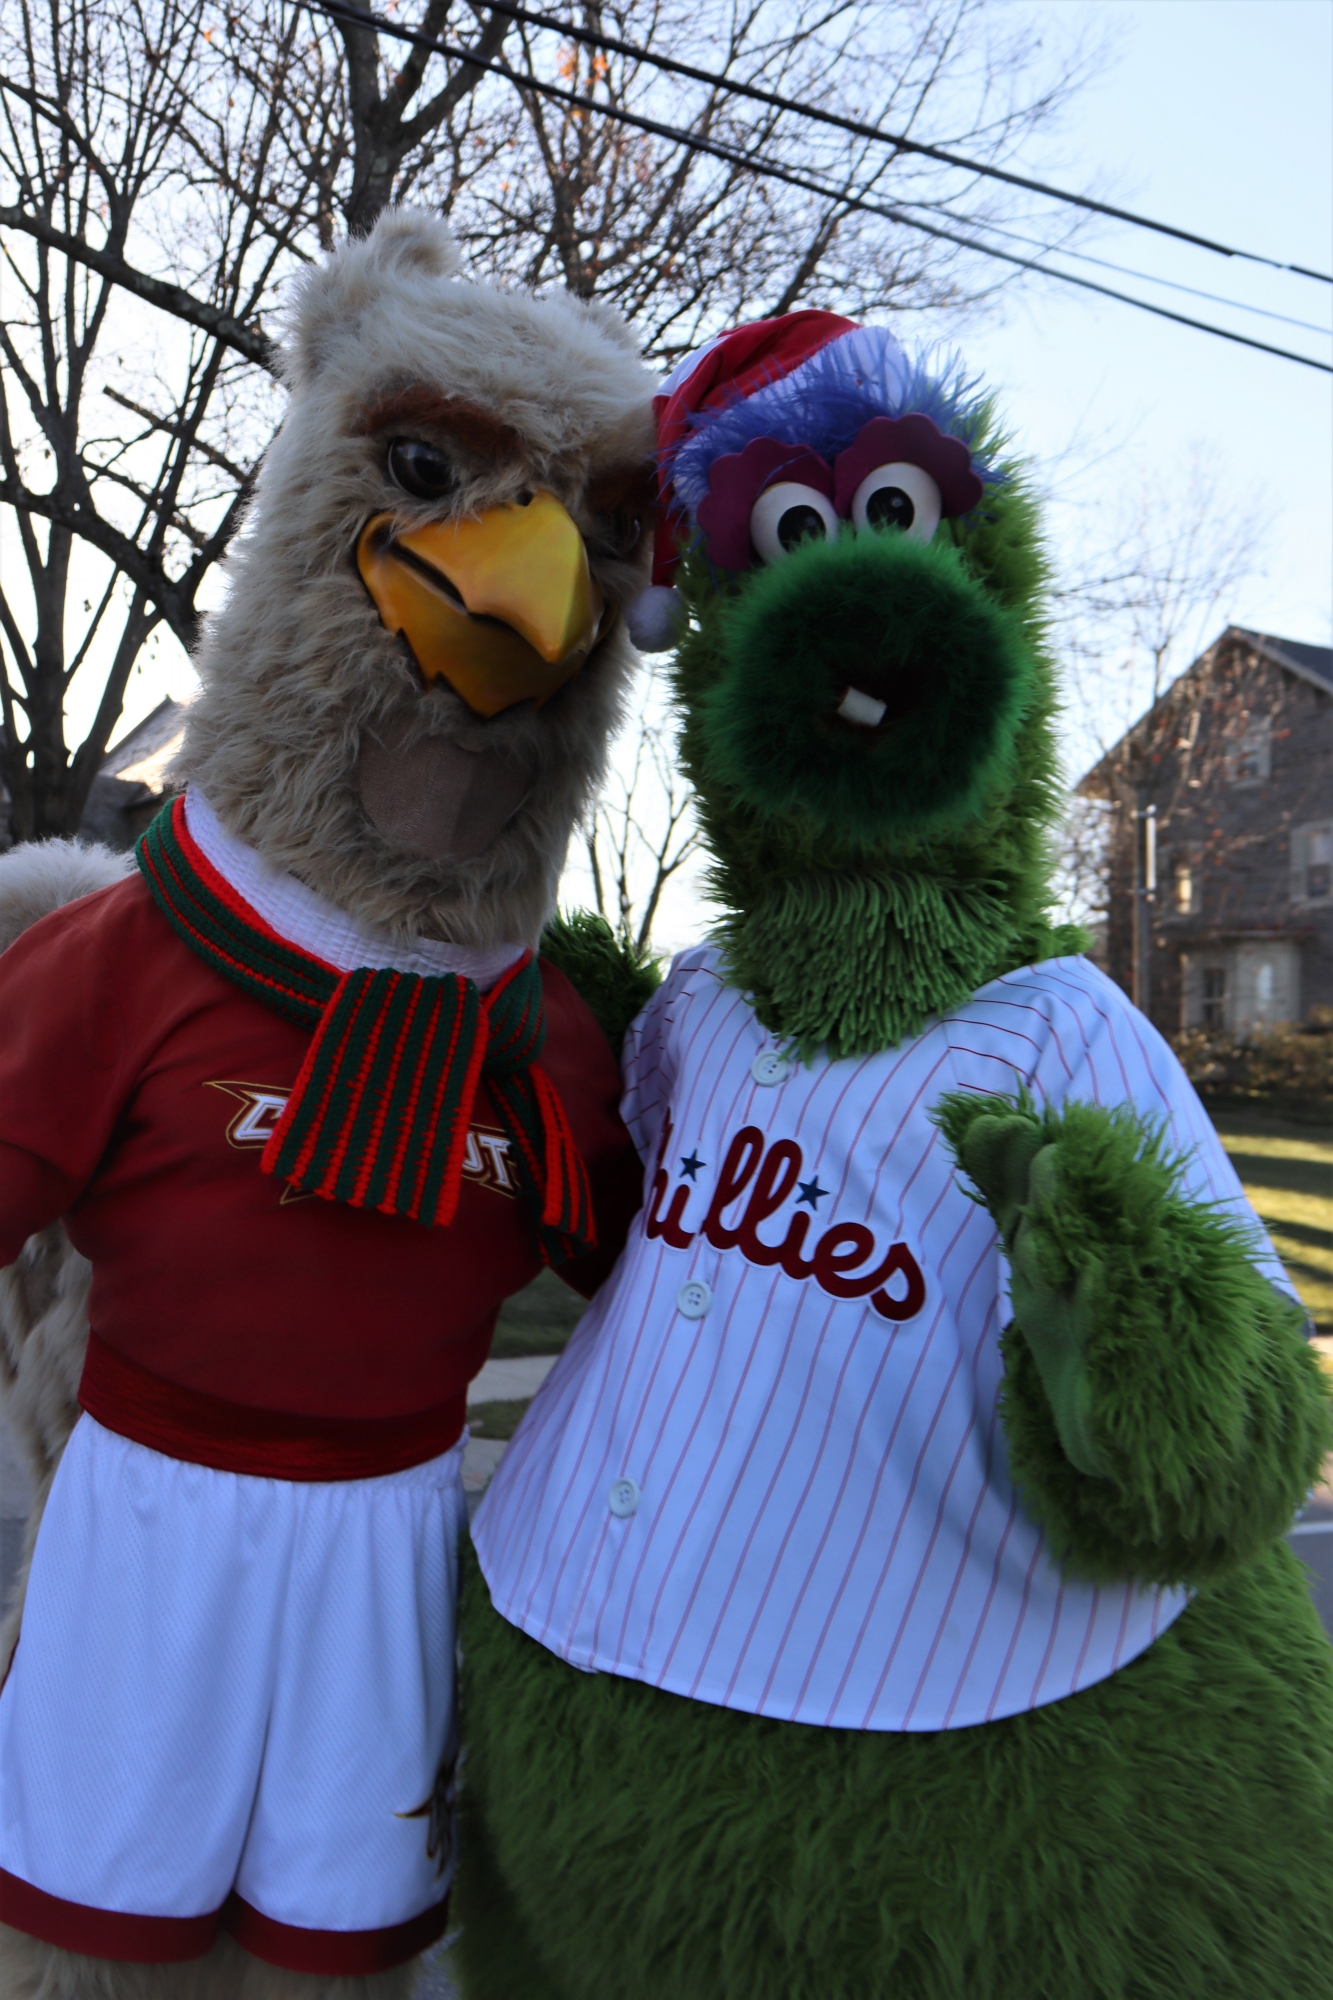 Big Griff poses with the Phillie Phanatic before the Chestnut Hill Holiday Parade in December.